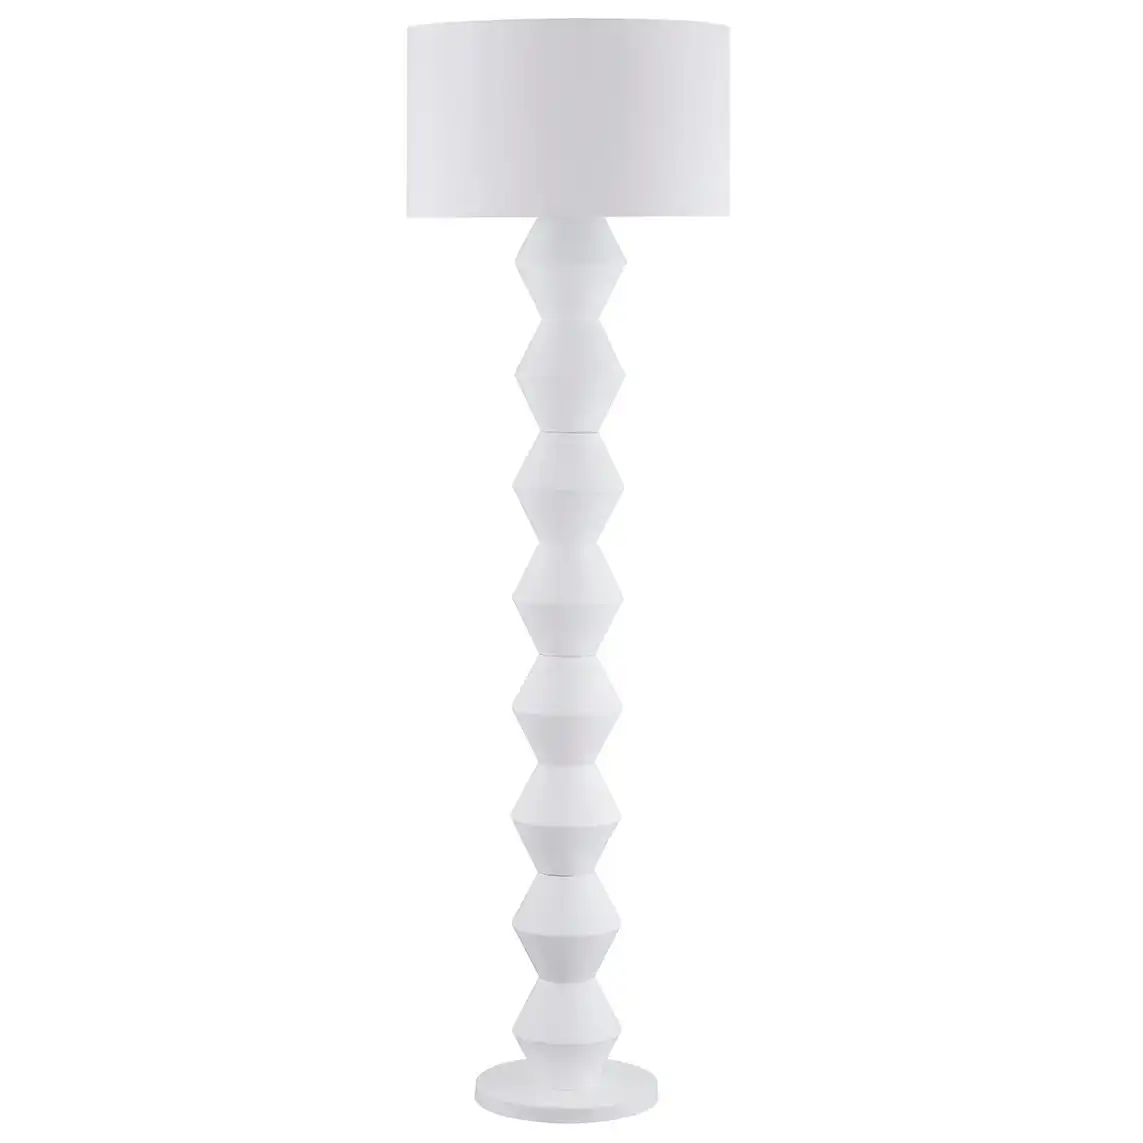 Cafe Lighting Abstract Floor Lamp - White